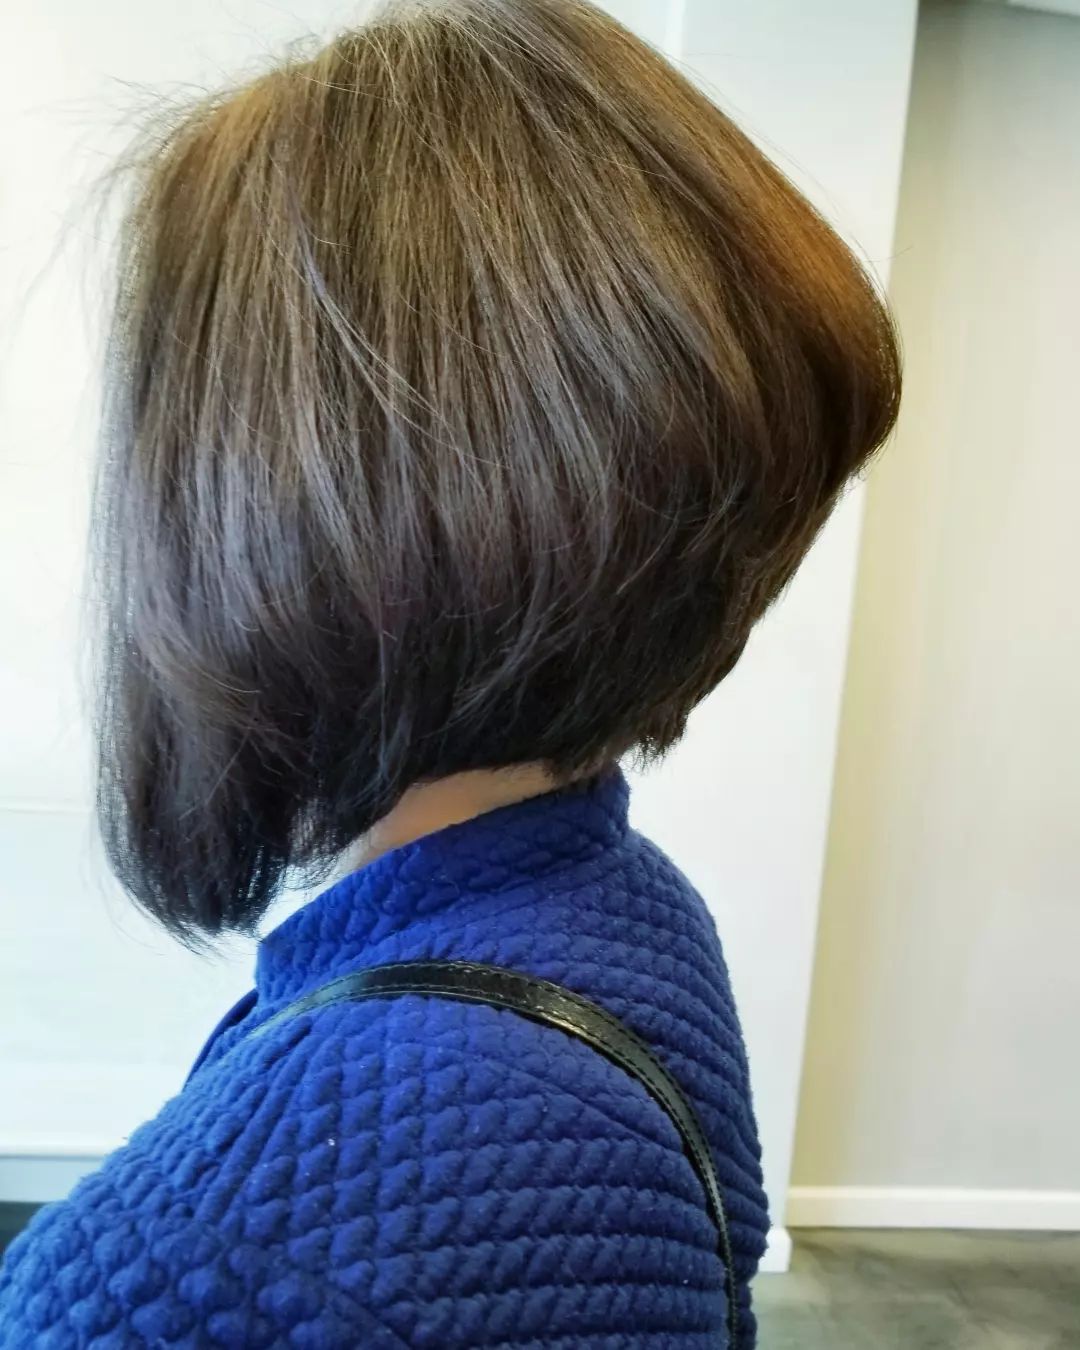 Stacked Bob 90 Long stacked bob | Medium length stacked bob | Pictures of stacked bob haircuts front and back Stacked Bob Hairstyles for Women